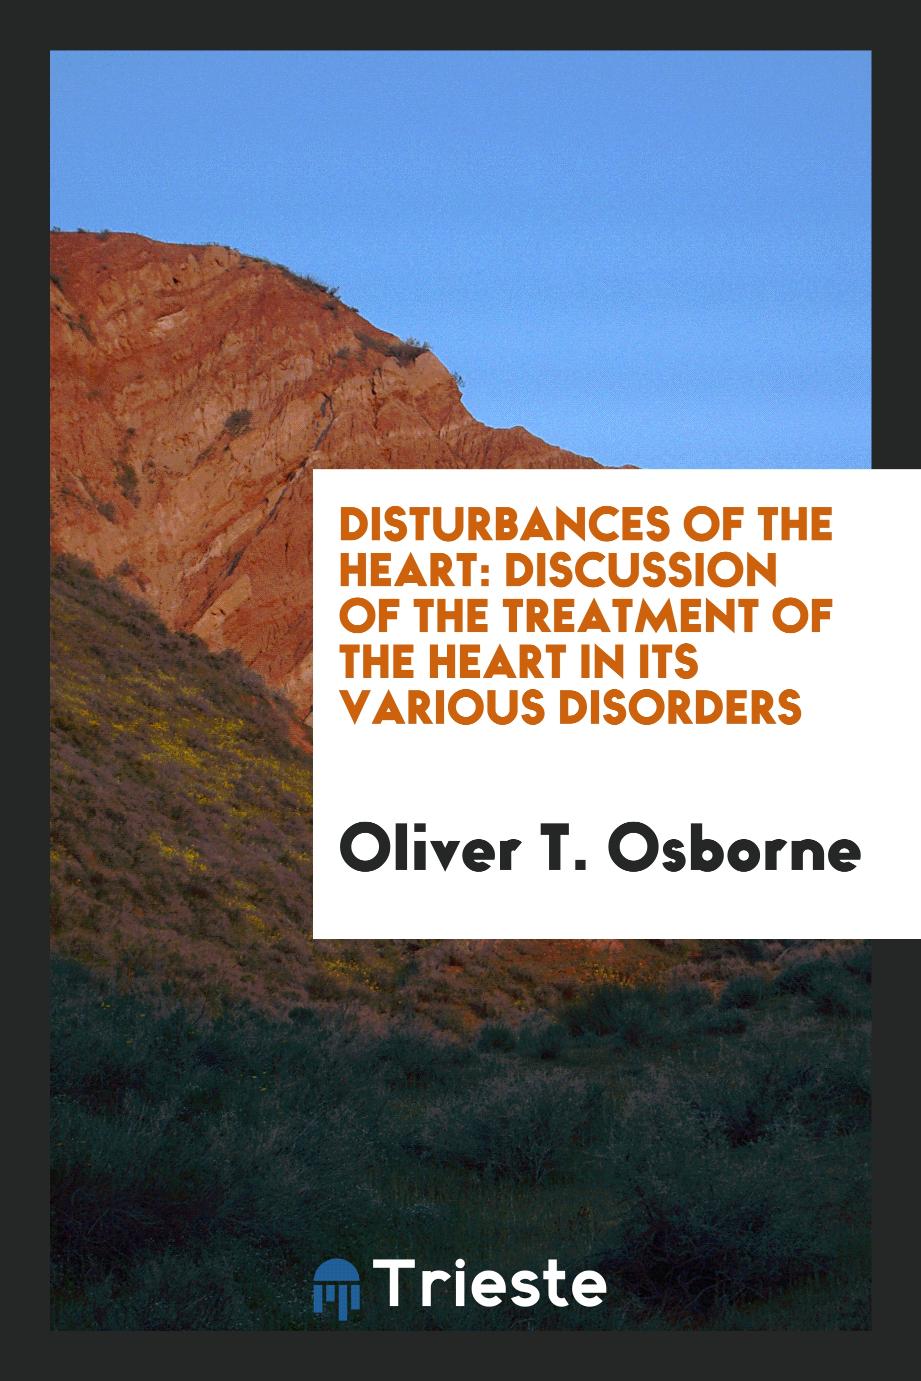 Disturbances of the Heart: Discussion of the Treatment of the Heart in Its Various Disorders